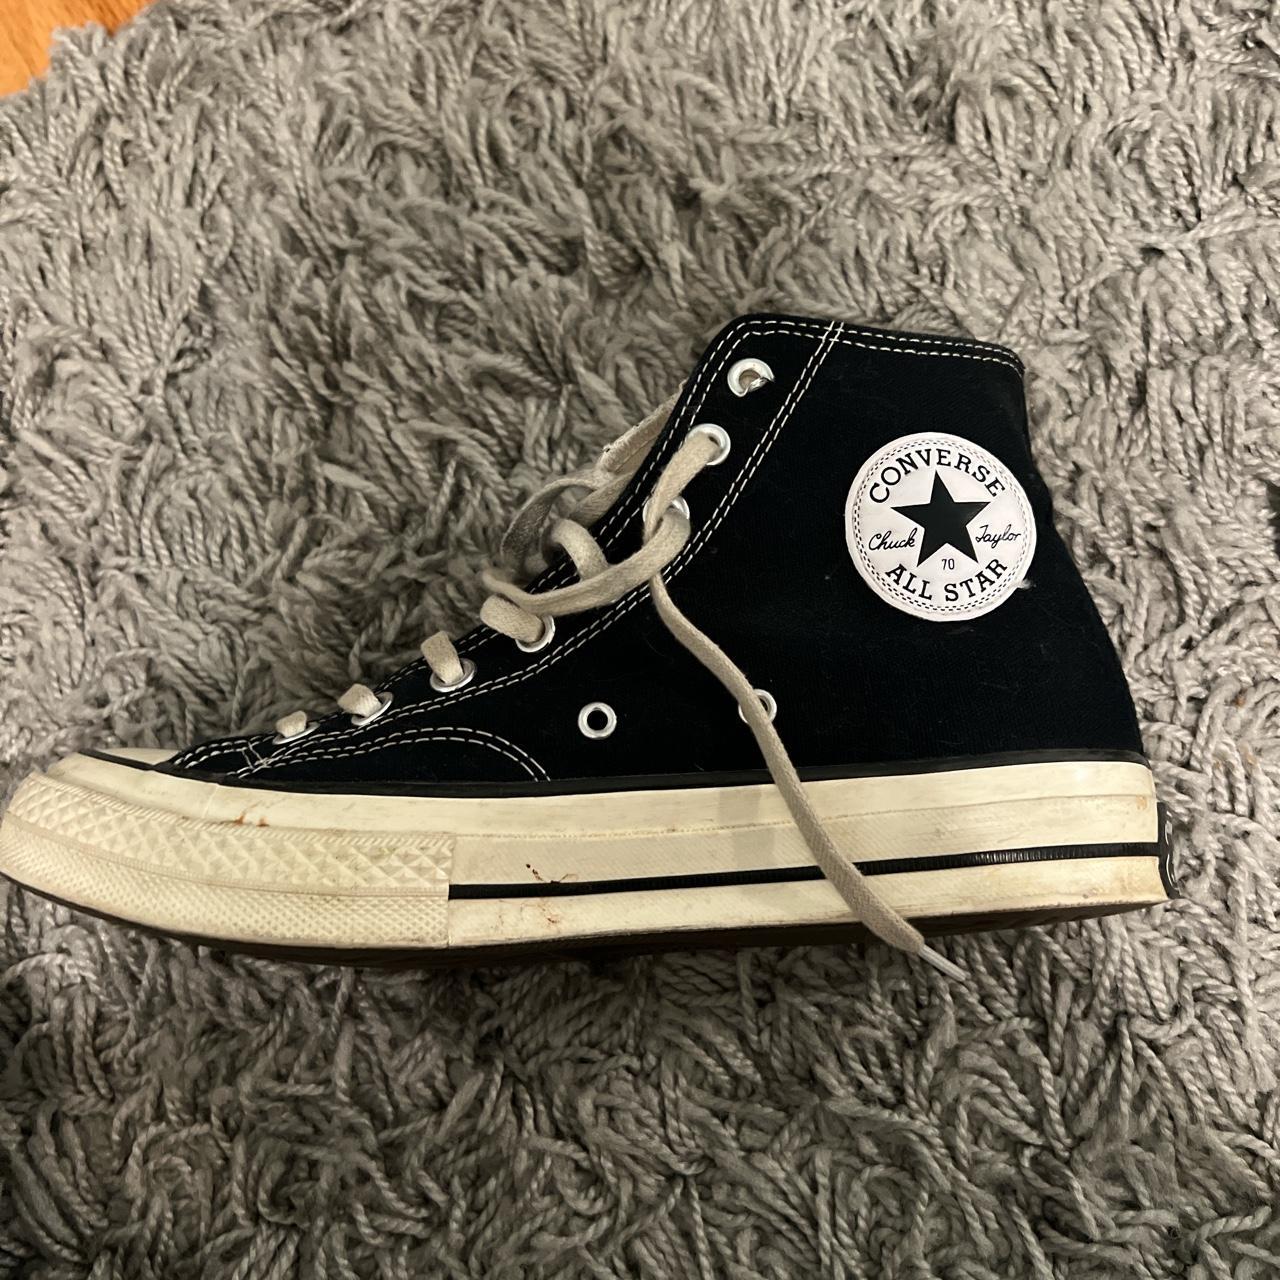 Converse Women's Trainers (2)